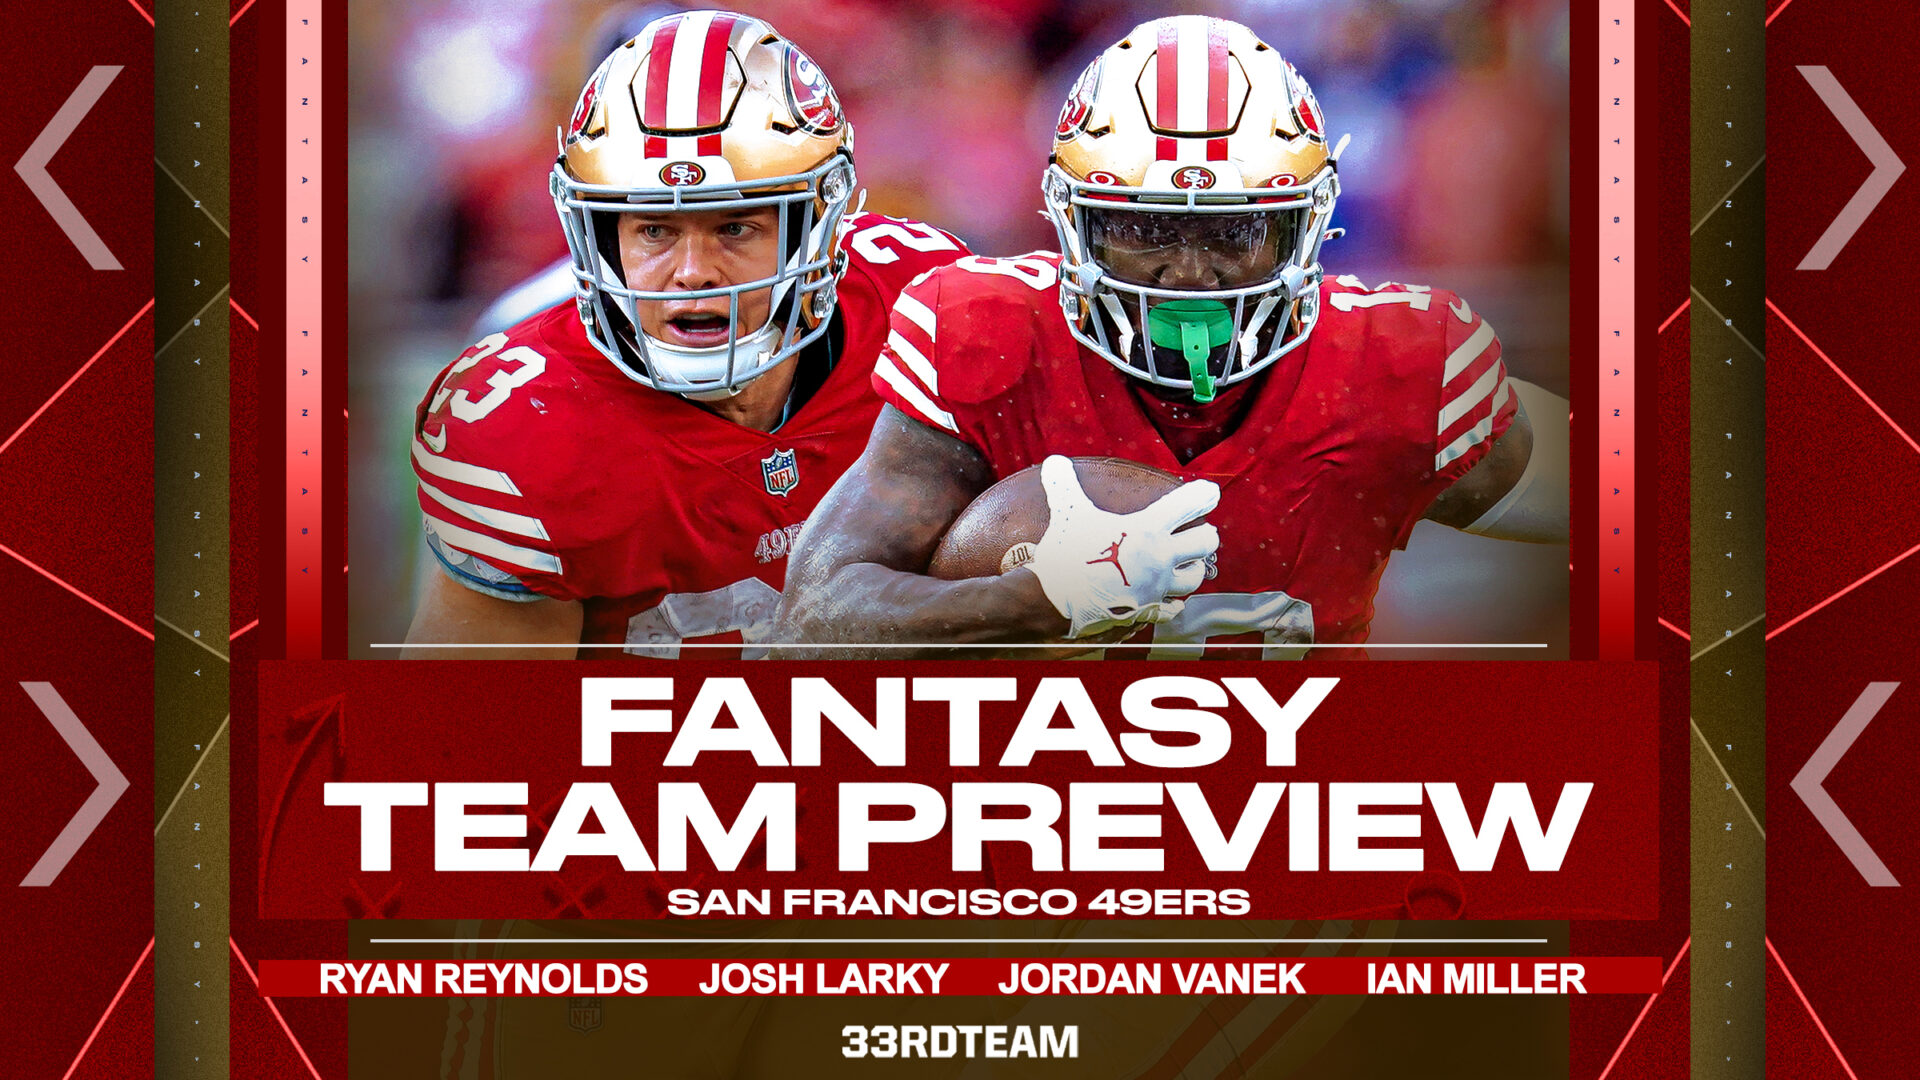 Red graphic reading "Fantasy Team Preview, San Francisco 49ers" featuring cut-out images of Christian McCaffrey and Deebo Samuel